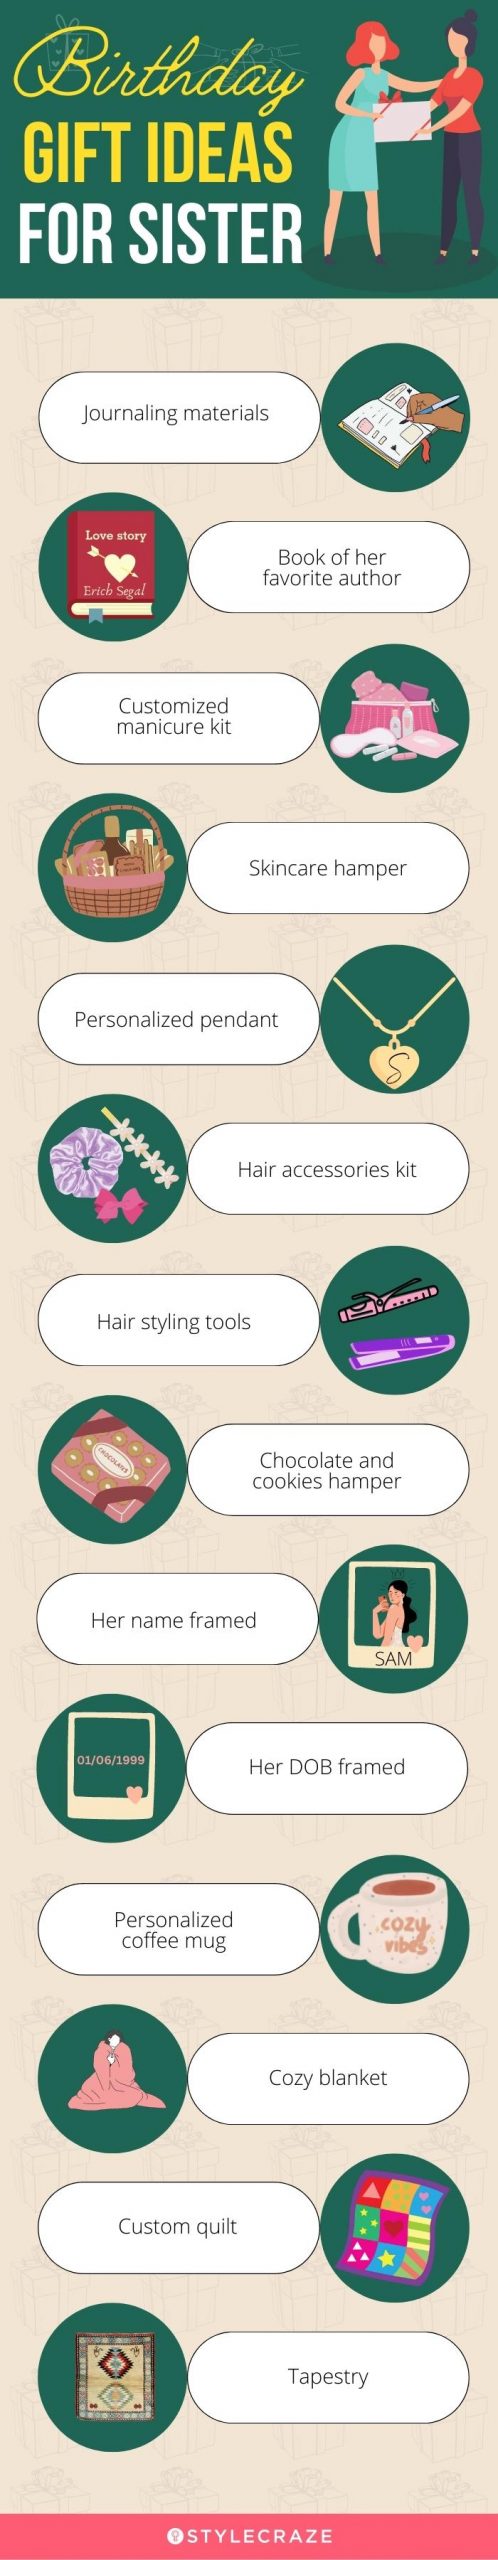 birthday gift ideas for sister (infographic)